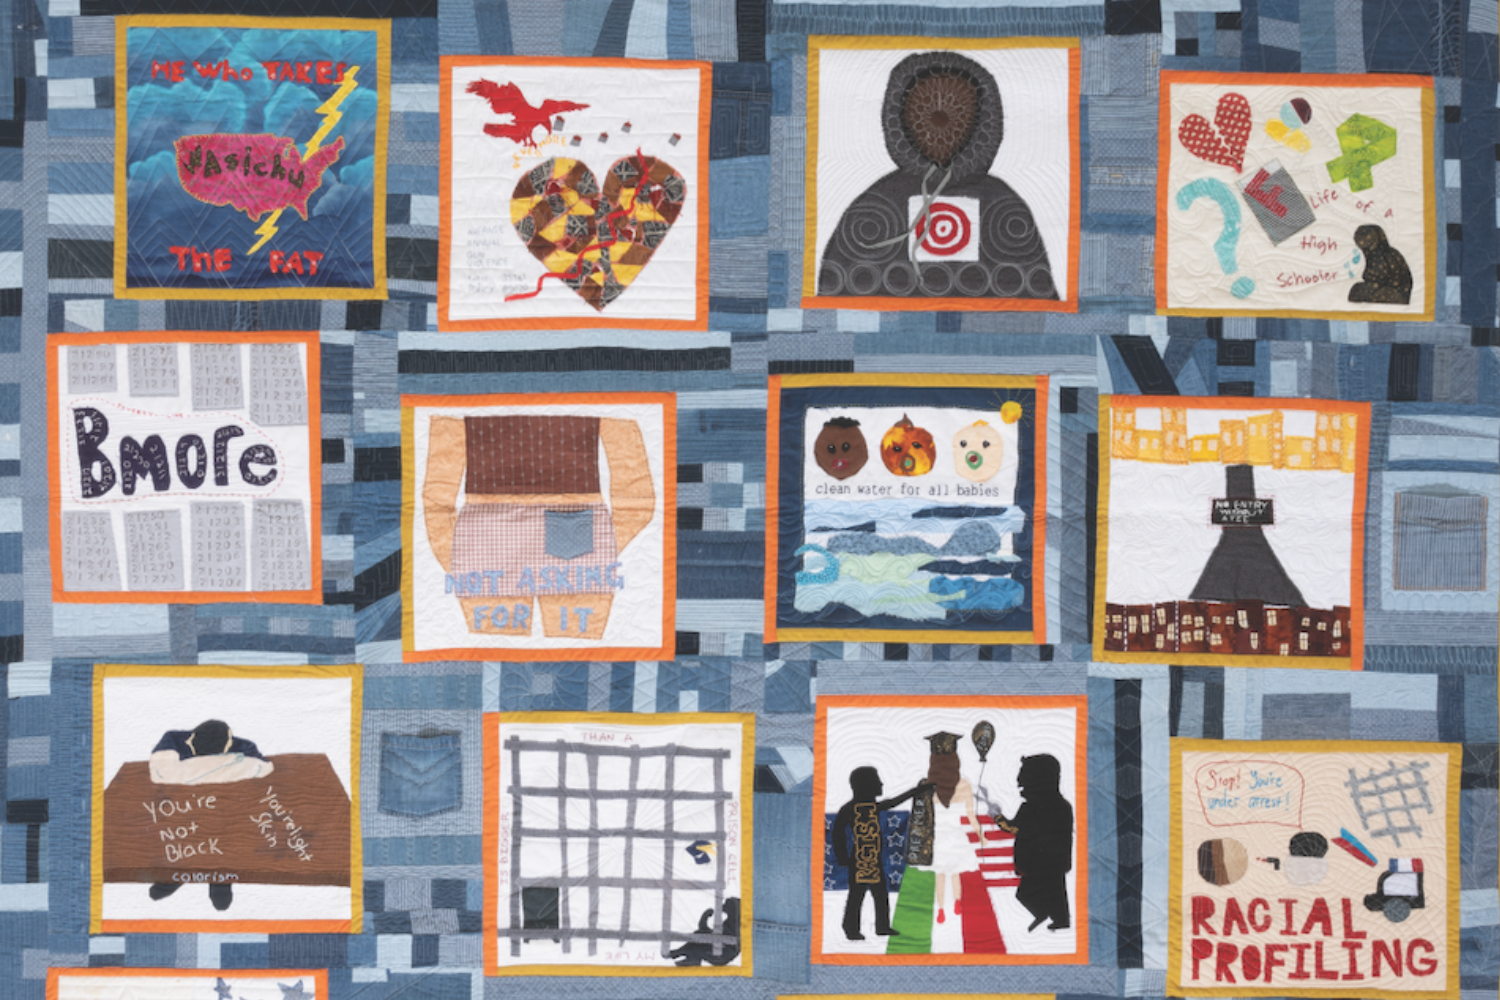 A close up of the Social Justice Society quilt called Sustainability. Twelve blocks are visible, each with either an orange or yellow border. The quilt’s background is comprised of small blocks in various shades of blue, ranging from light blue to dark blue. The quilt blocks cover a range of social justice issues, including racial profiling, incarceration, sexual harassment, colorism and more.